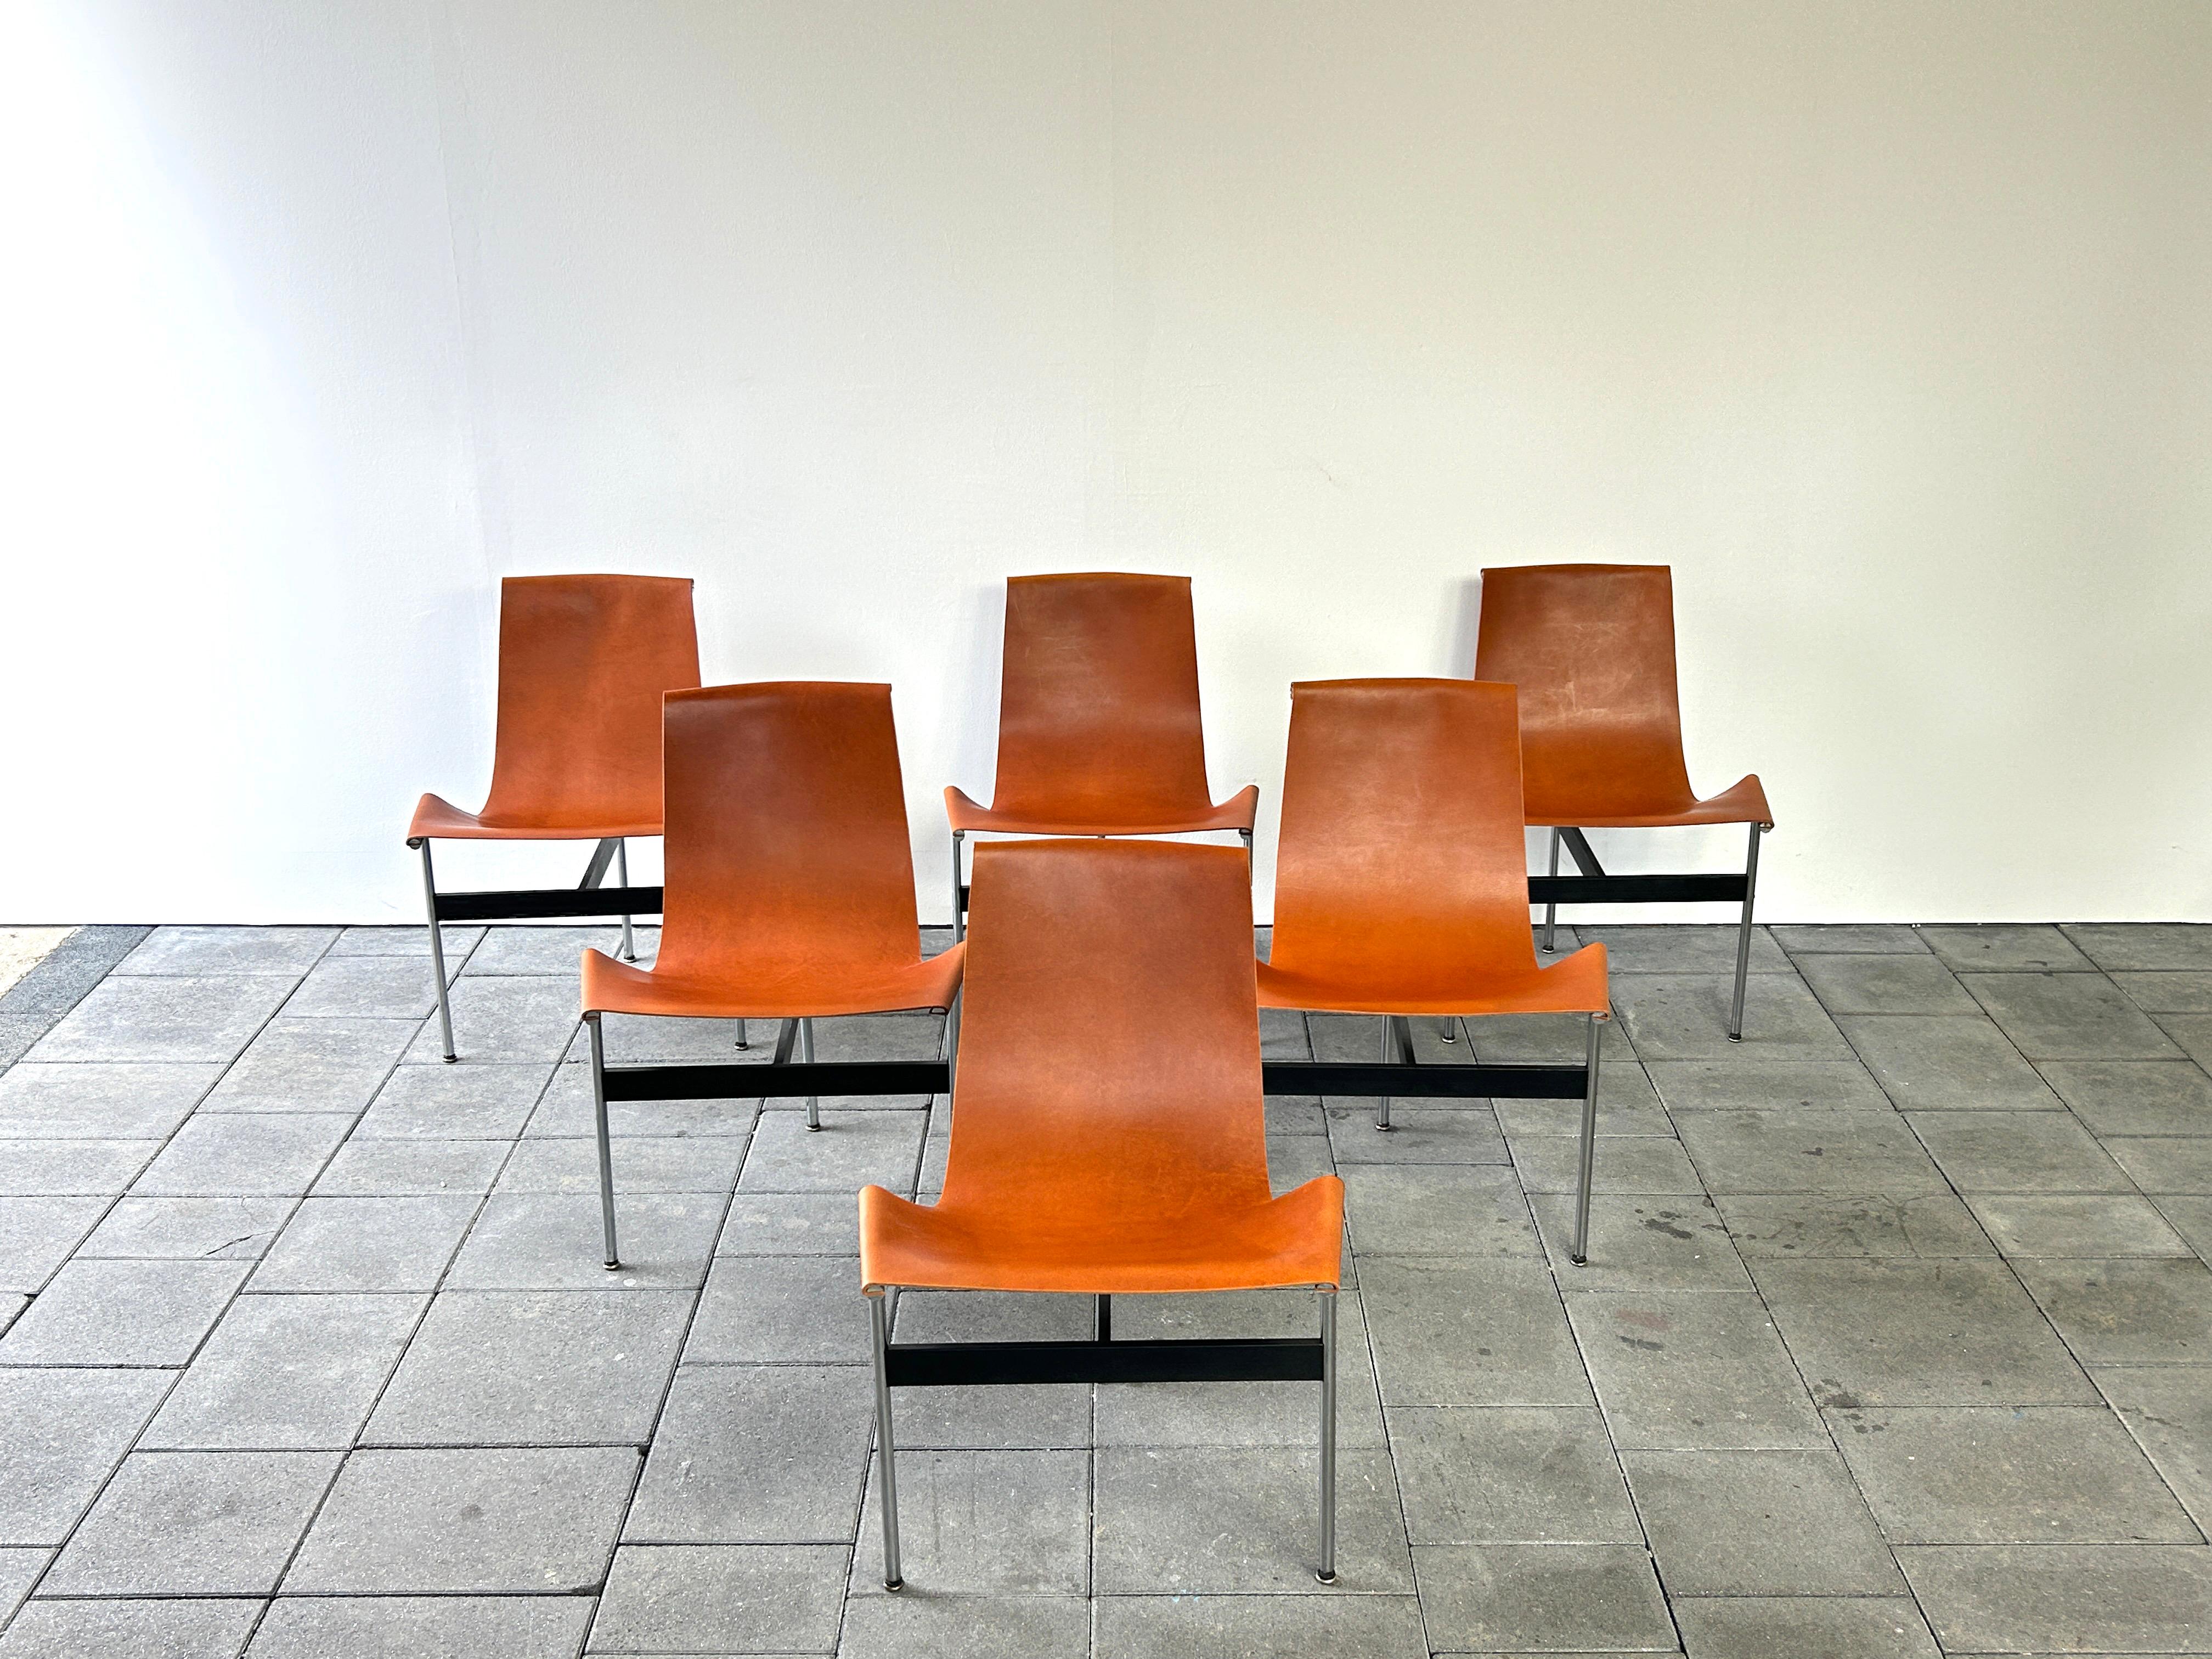 American Set of 6 T-chairs designed by Katavolos Litell & Kelley in 1952 For Sale